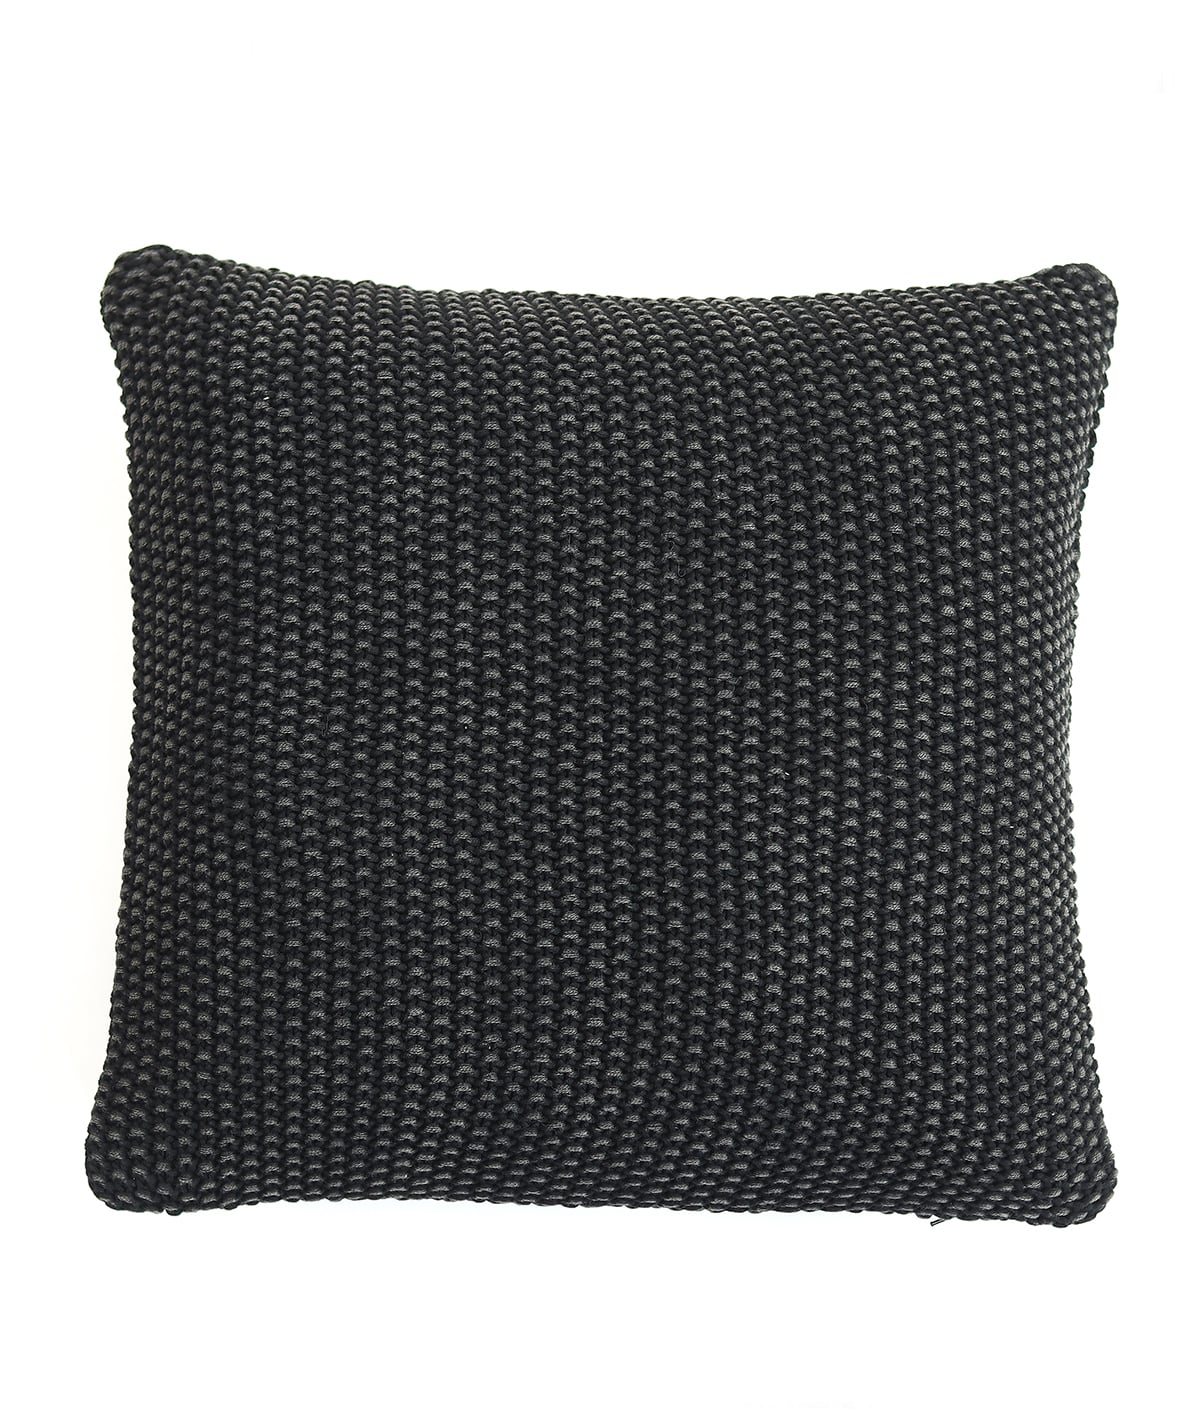 Knitted Purl Black Cotton Knitted Decorative 16 X 16 Inches Cushion Cover